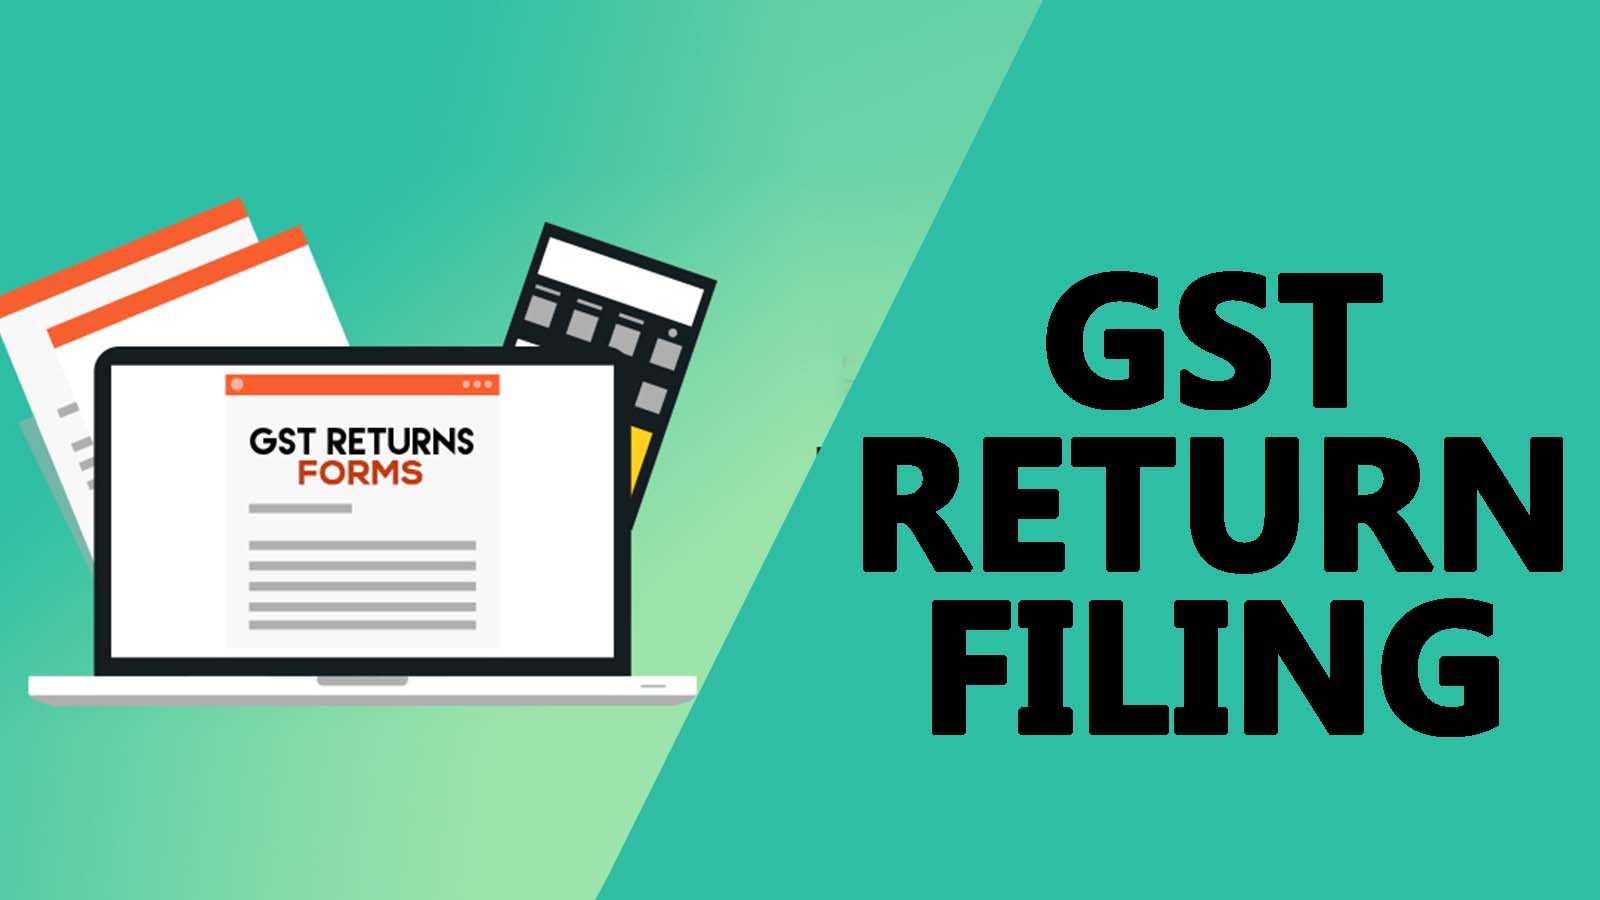 What is a GST Return?